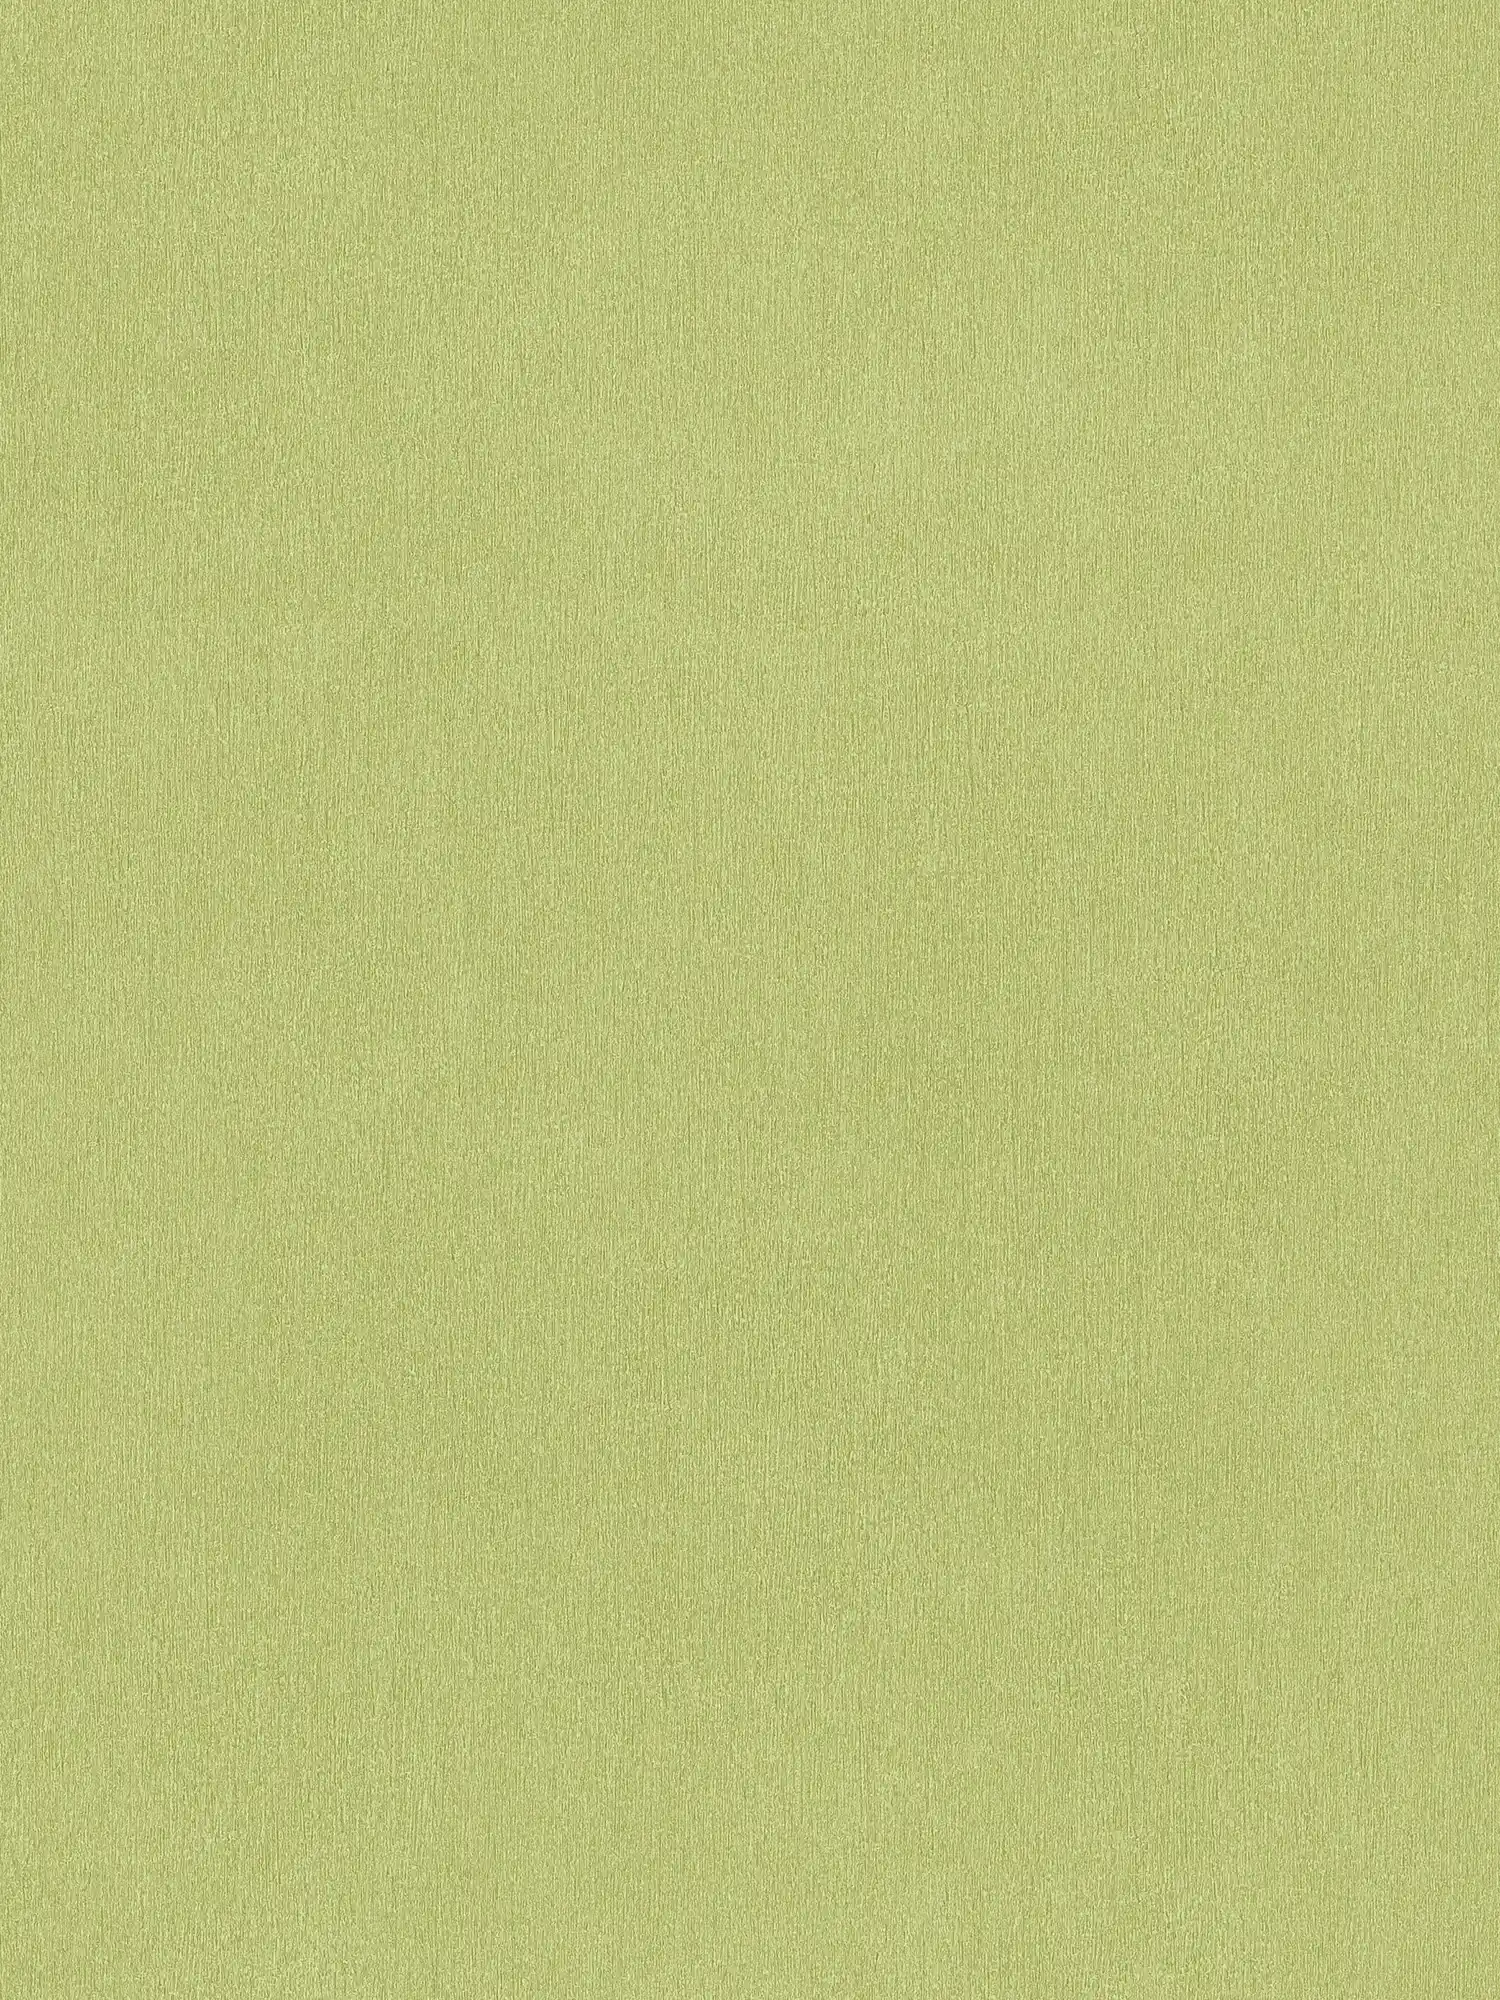 Wallpaper light green monochrome lime green with colour hatching
